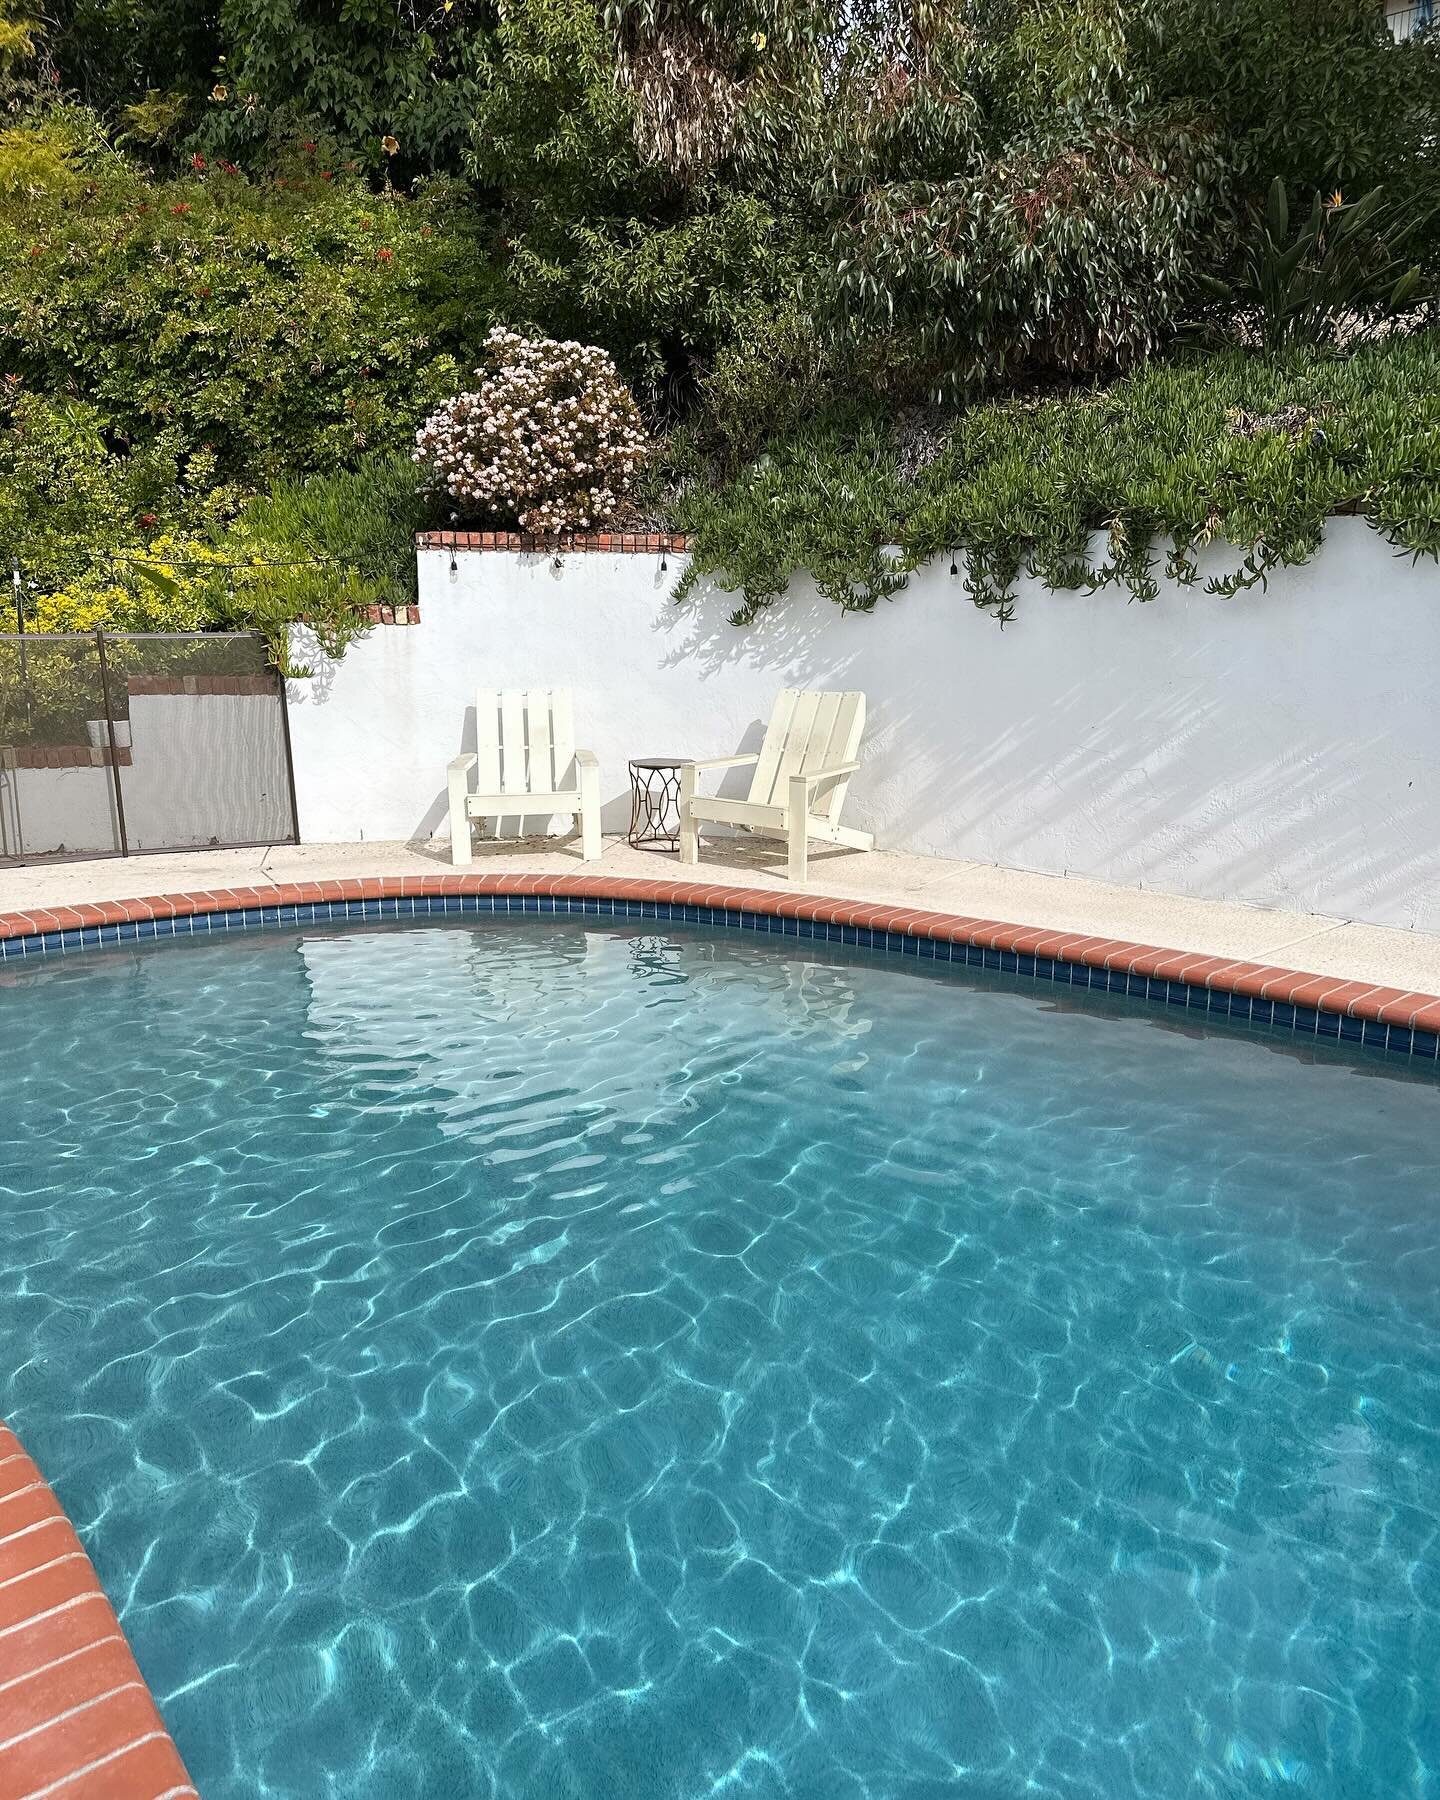 Just finished redoing our pools plaster and turning it to salt 🧂 water .💦 Oh man is it teasing me to jump in. Too bad it&rsquo;s icy cold. 🥶 

We agonized over the plaster choices - green, deep blue, grey. Each one changes the water color. I was d